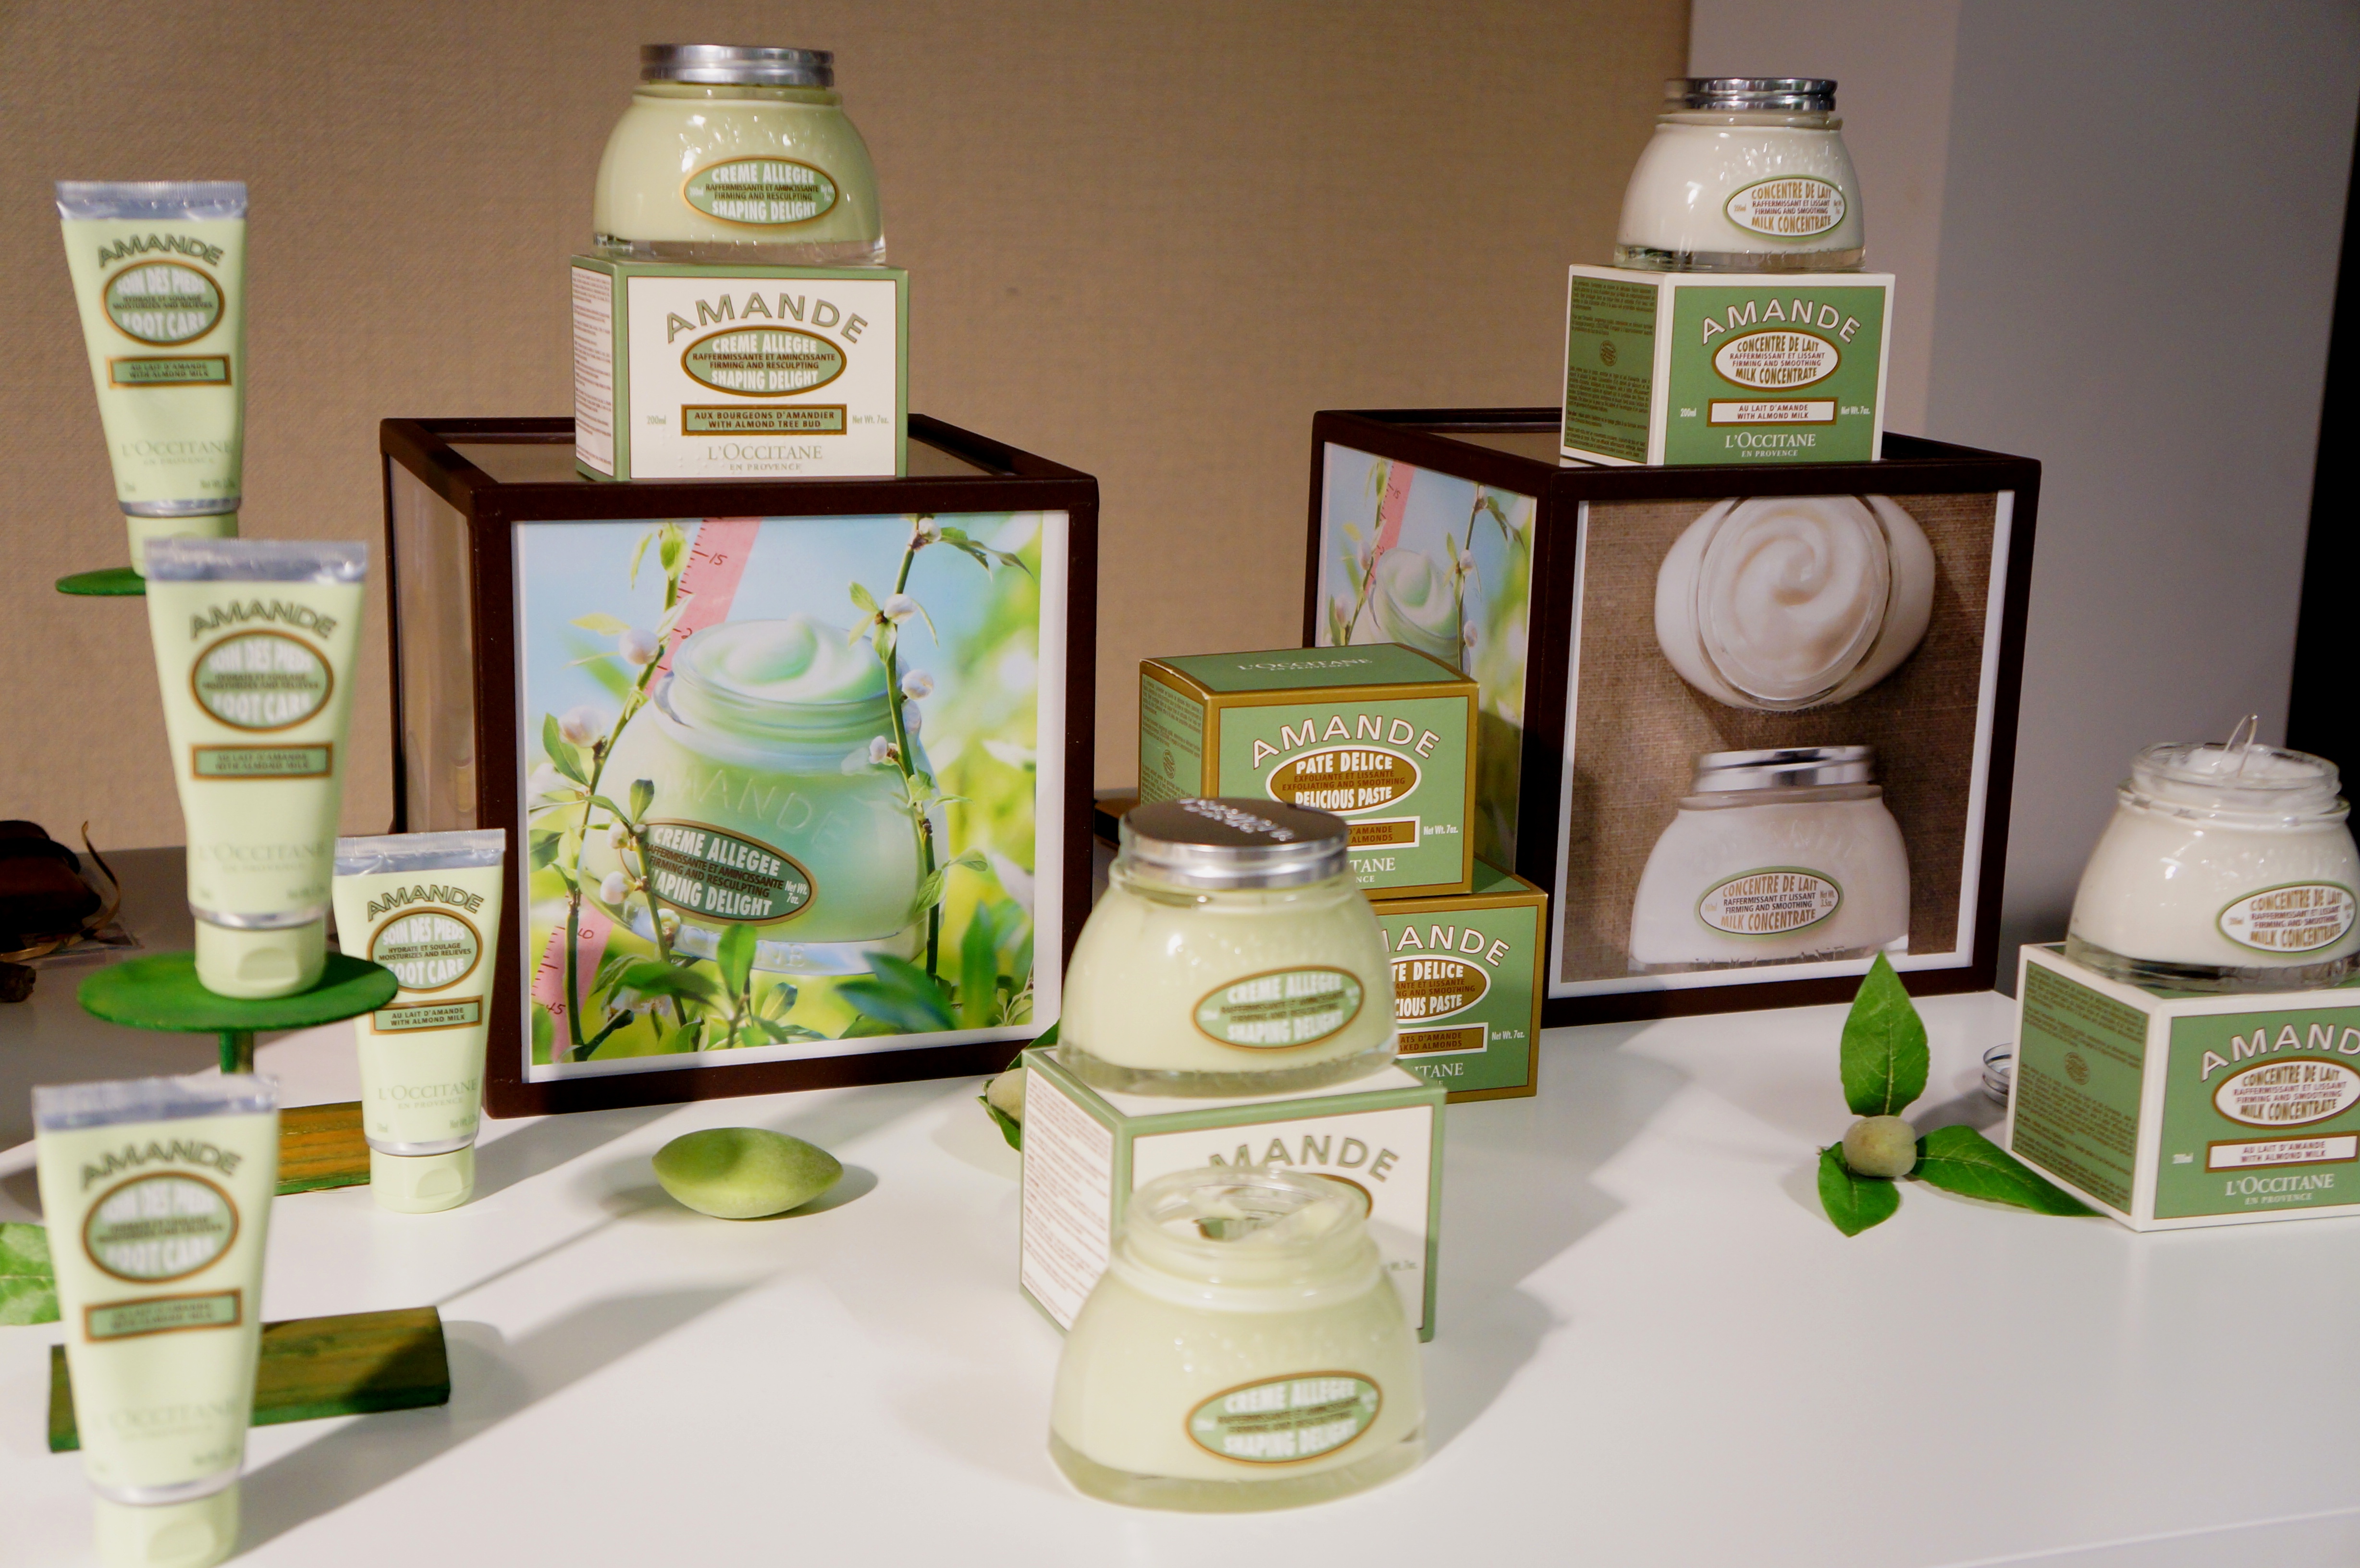 Almond range by L'Occitane/ Pic by kiwikoo